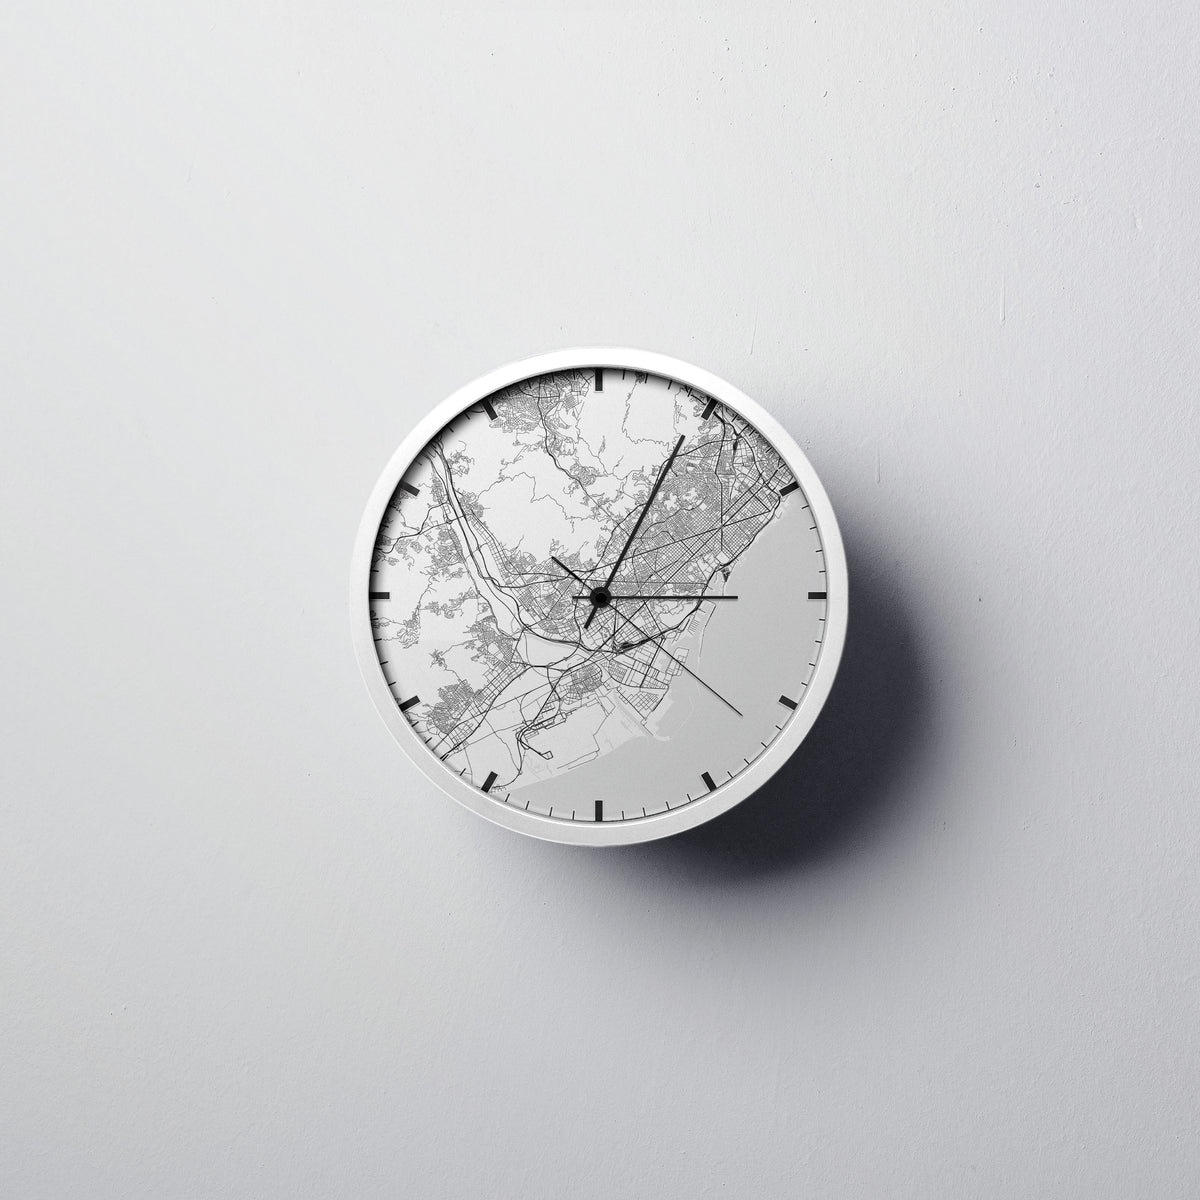 Barcelona Wall Clock - Point Two Design